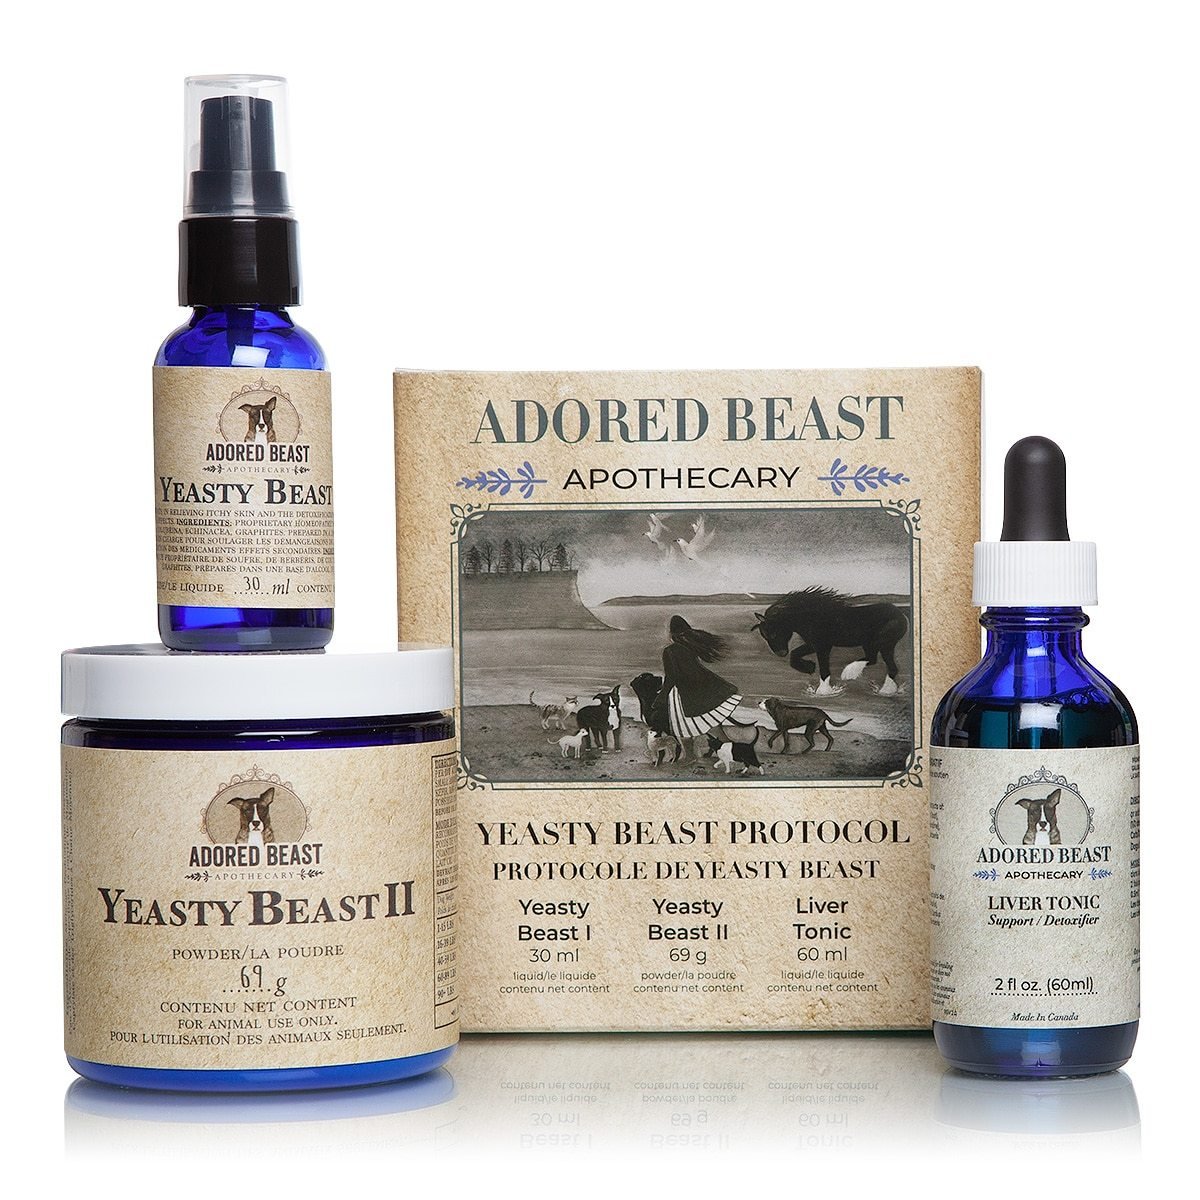 Adored Beast Yeasty Beast Protocol for dogs